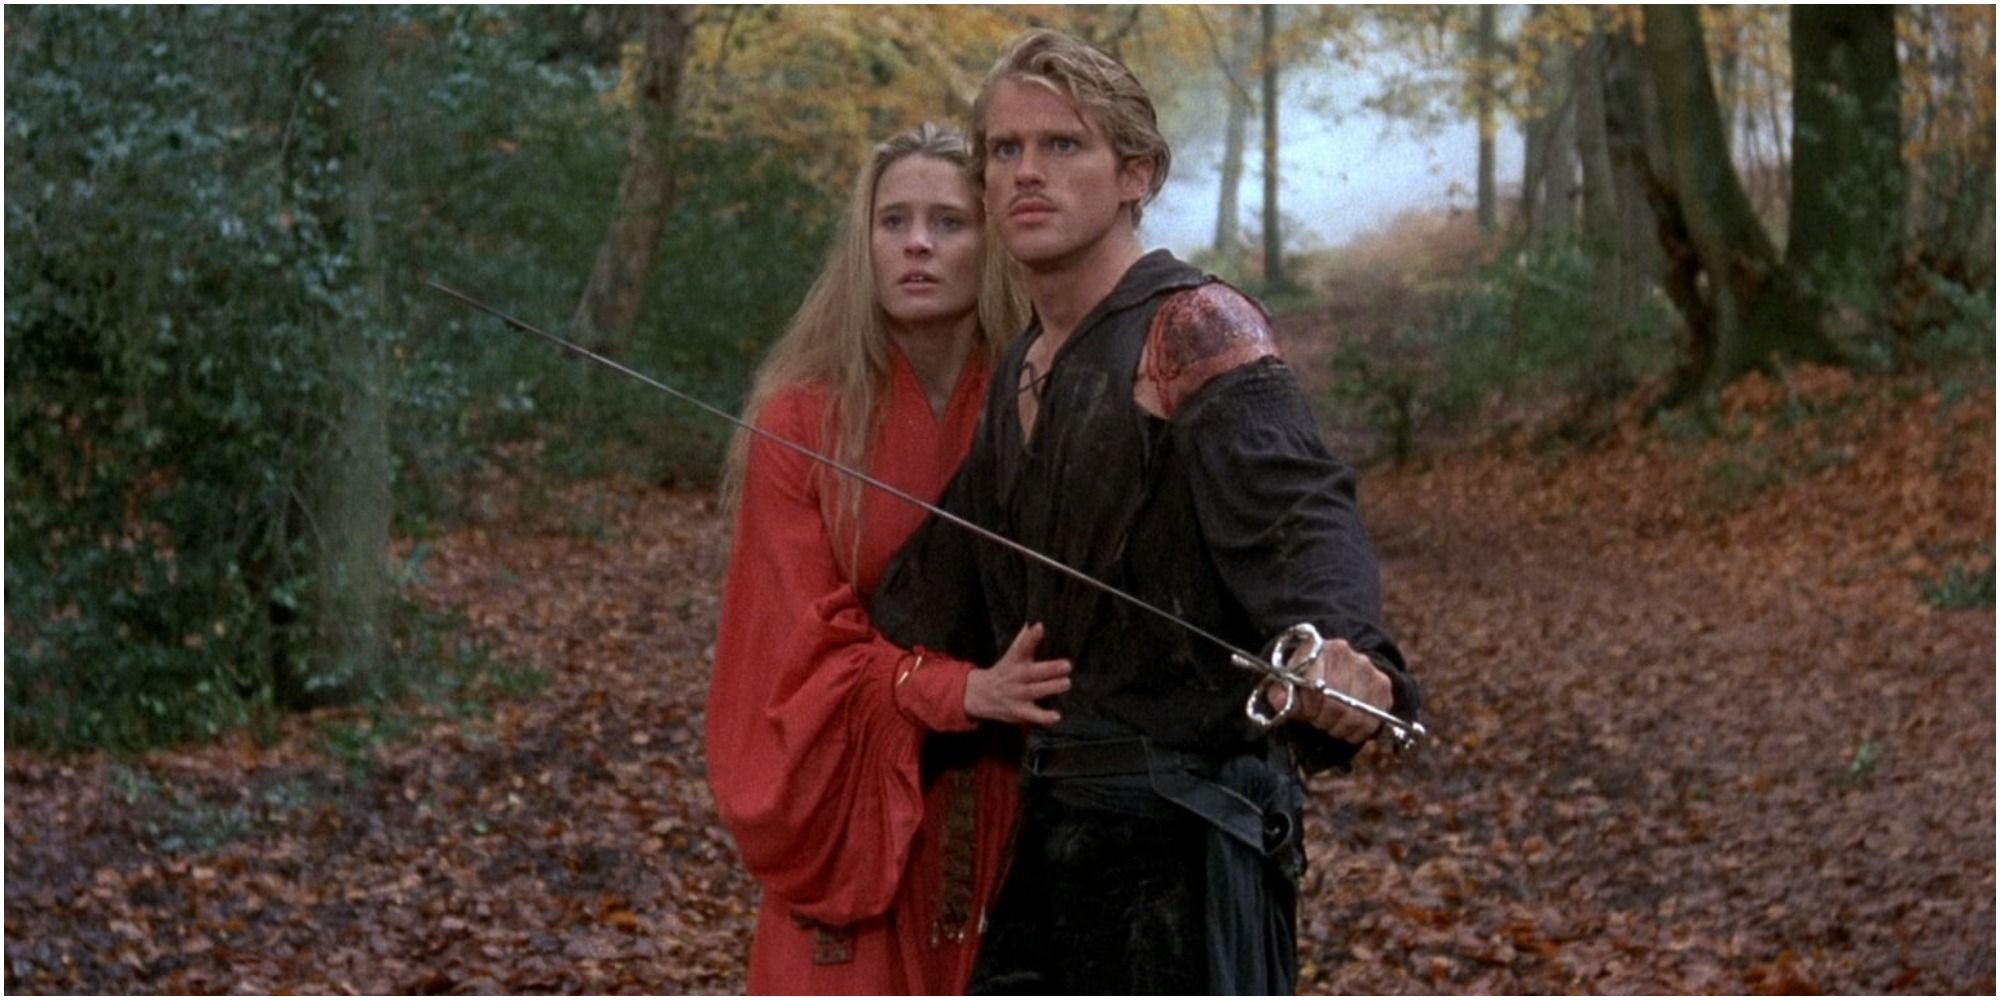 Buttercup and Wesley in the woods with a sword in The Princess Bride